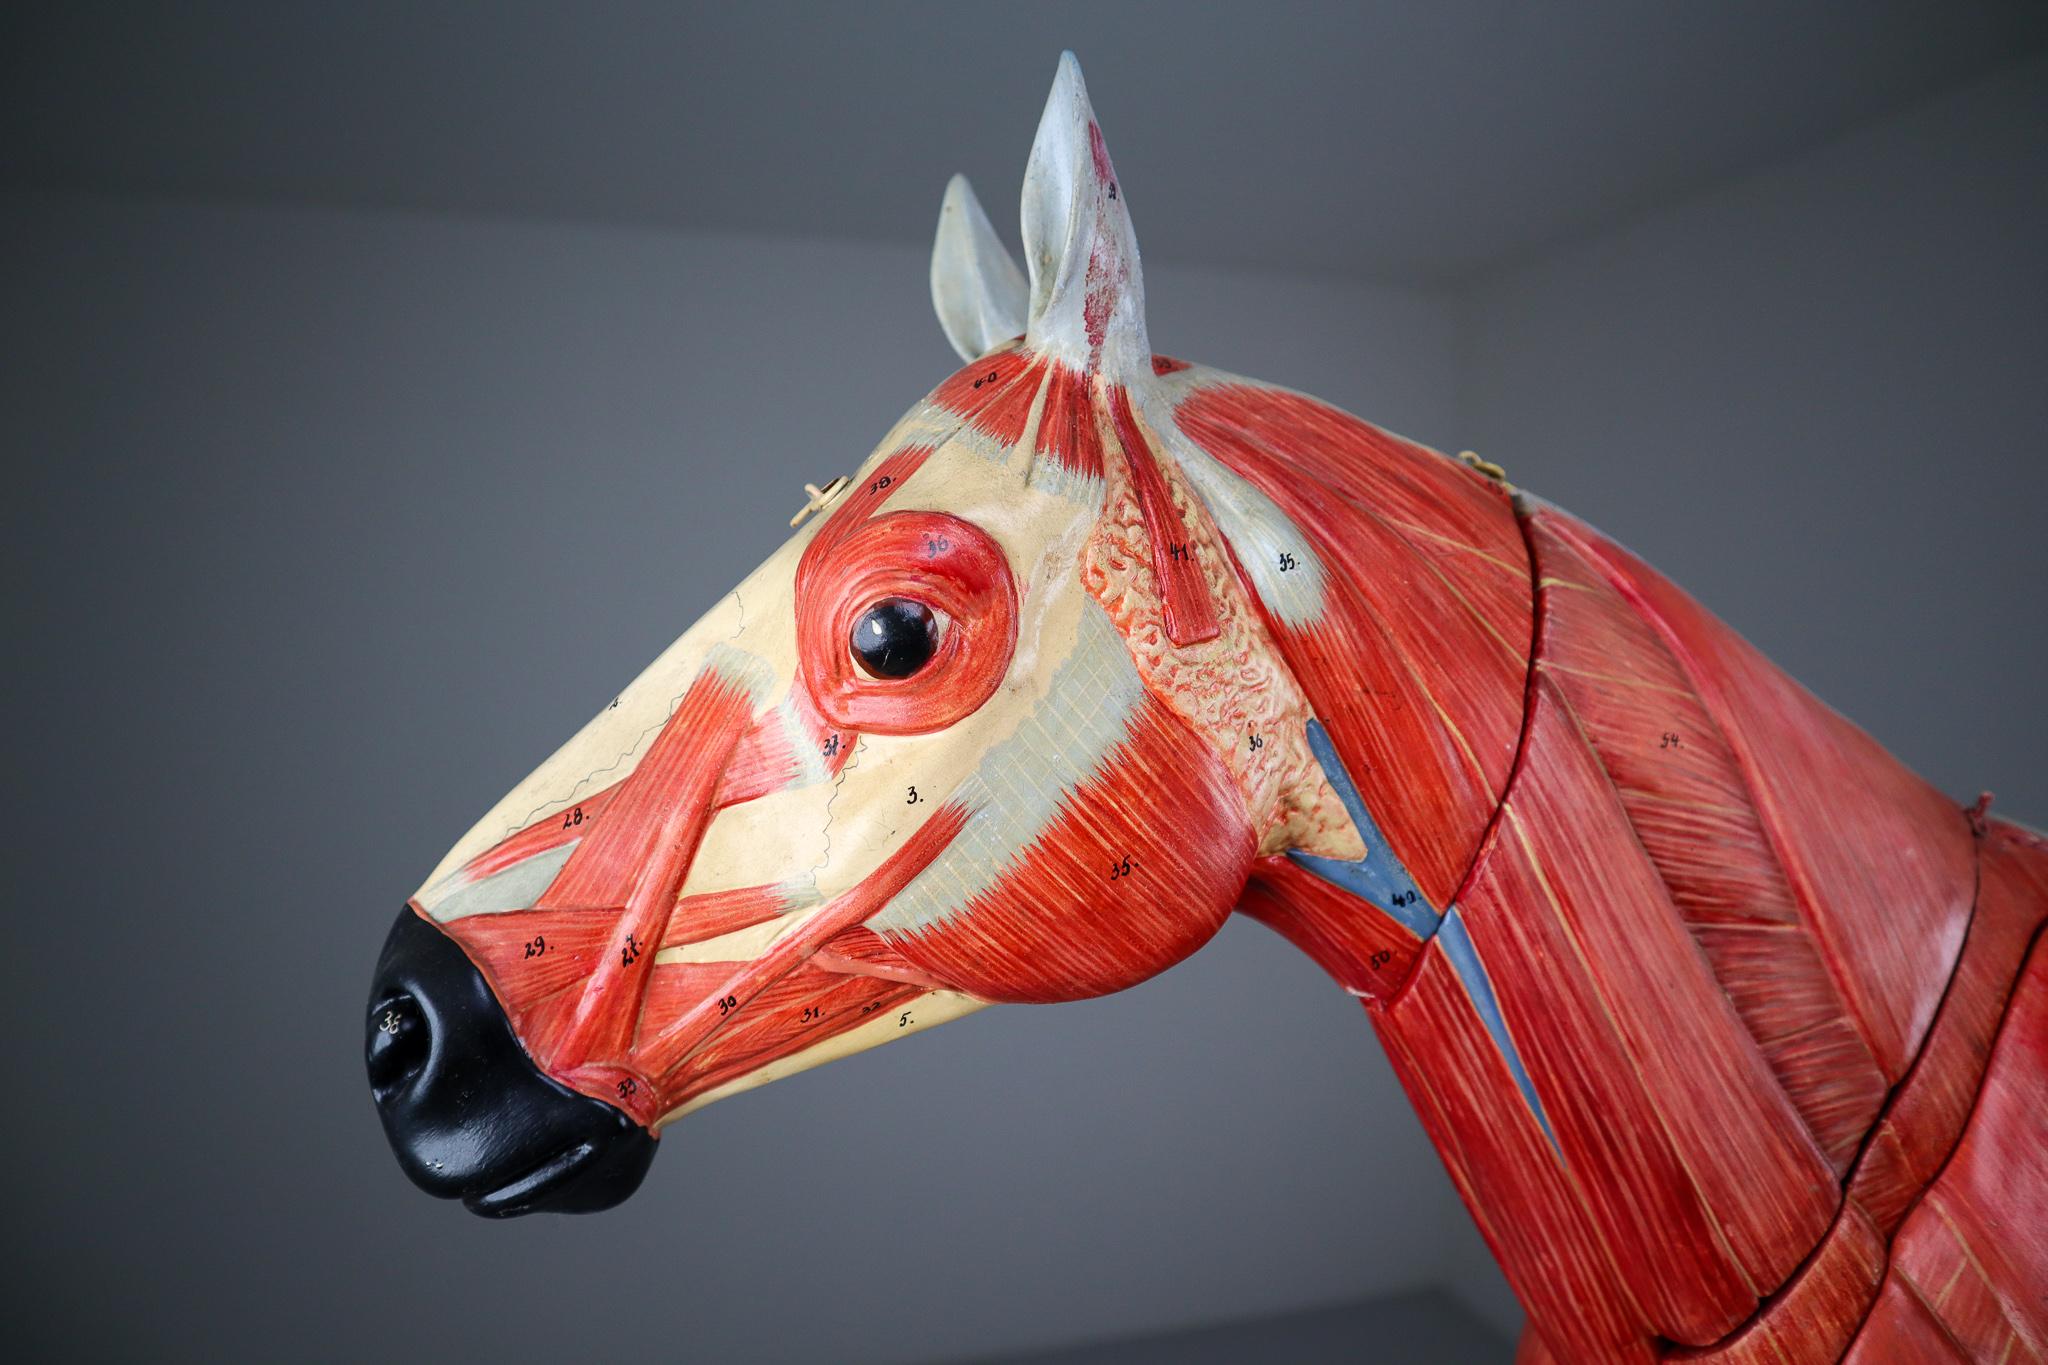 Bauhaus Large Anatomical Model of a Horse by Somso Germany 1920s